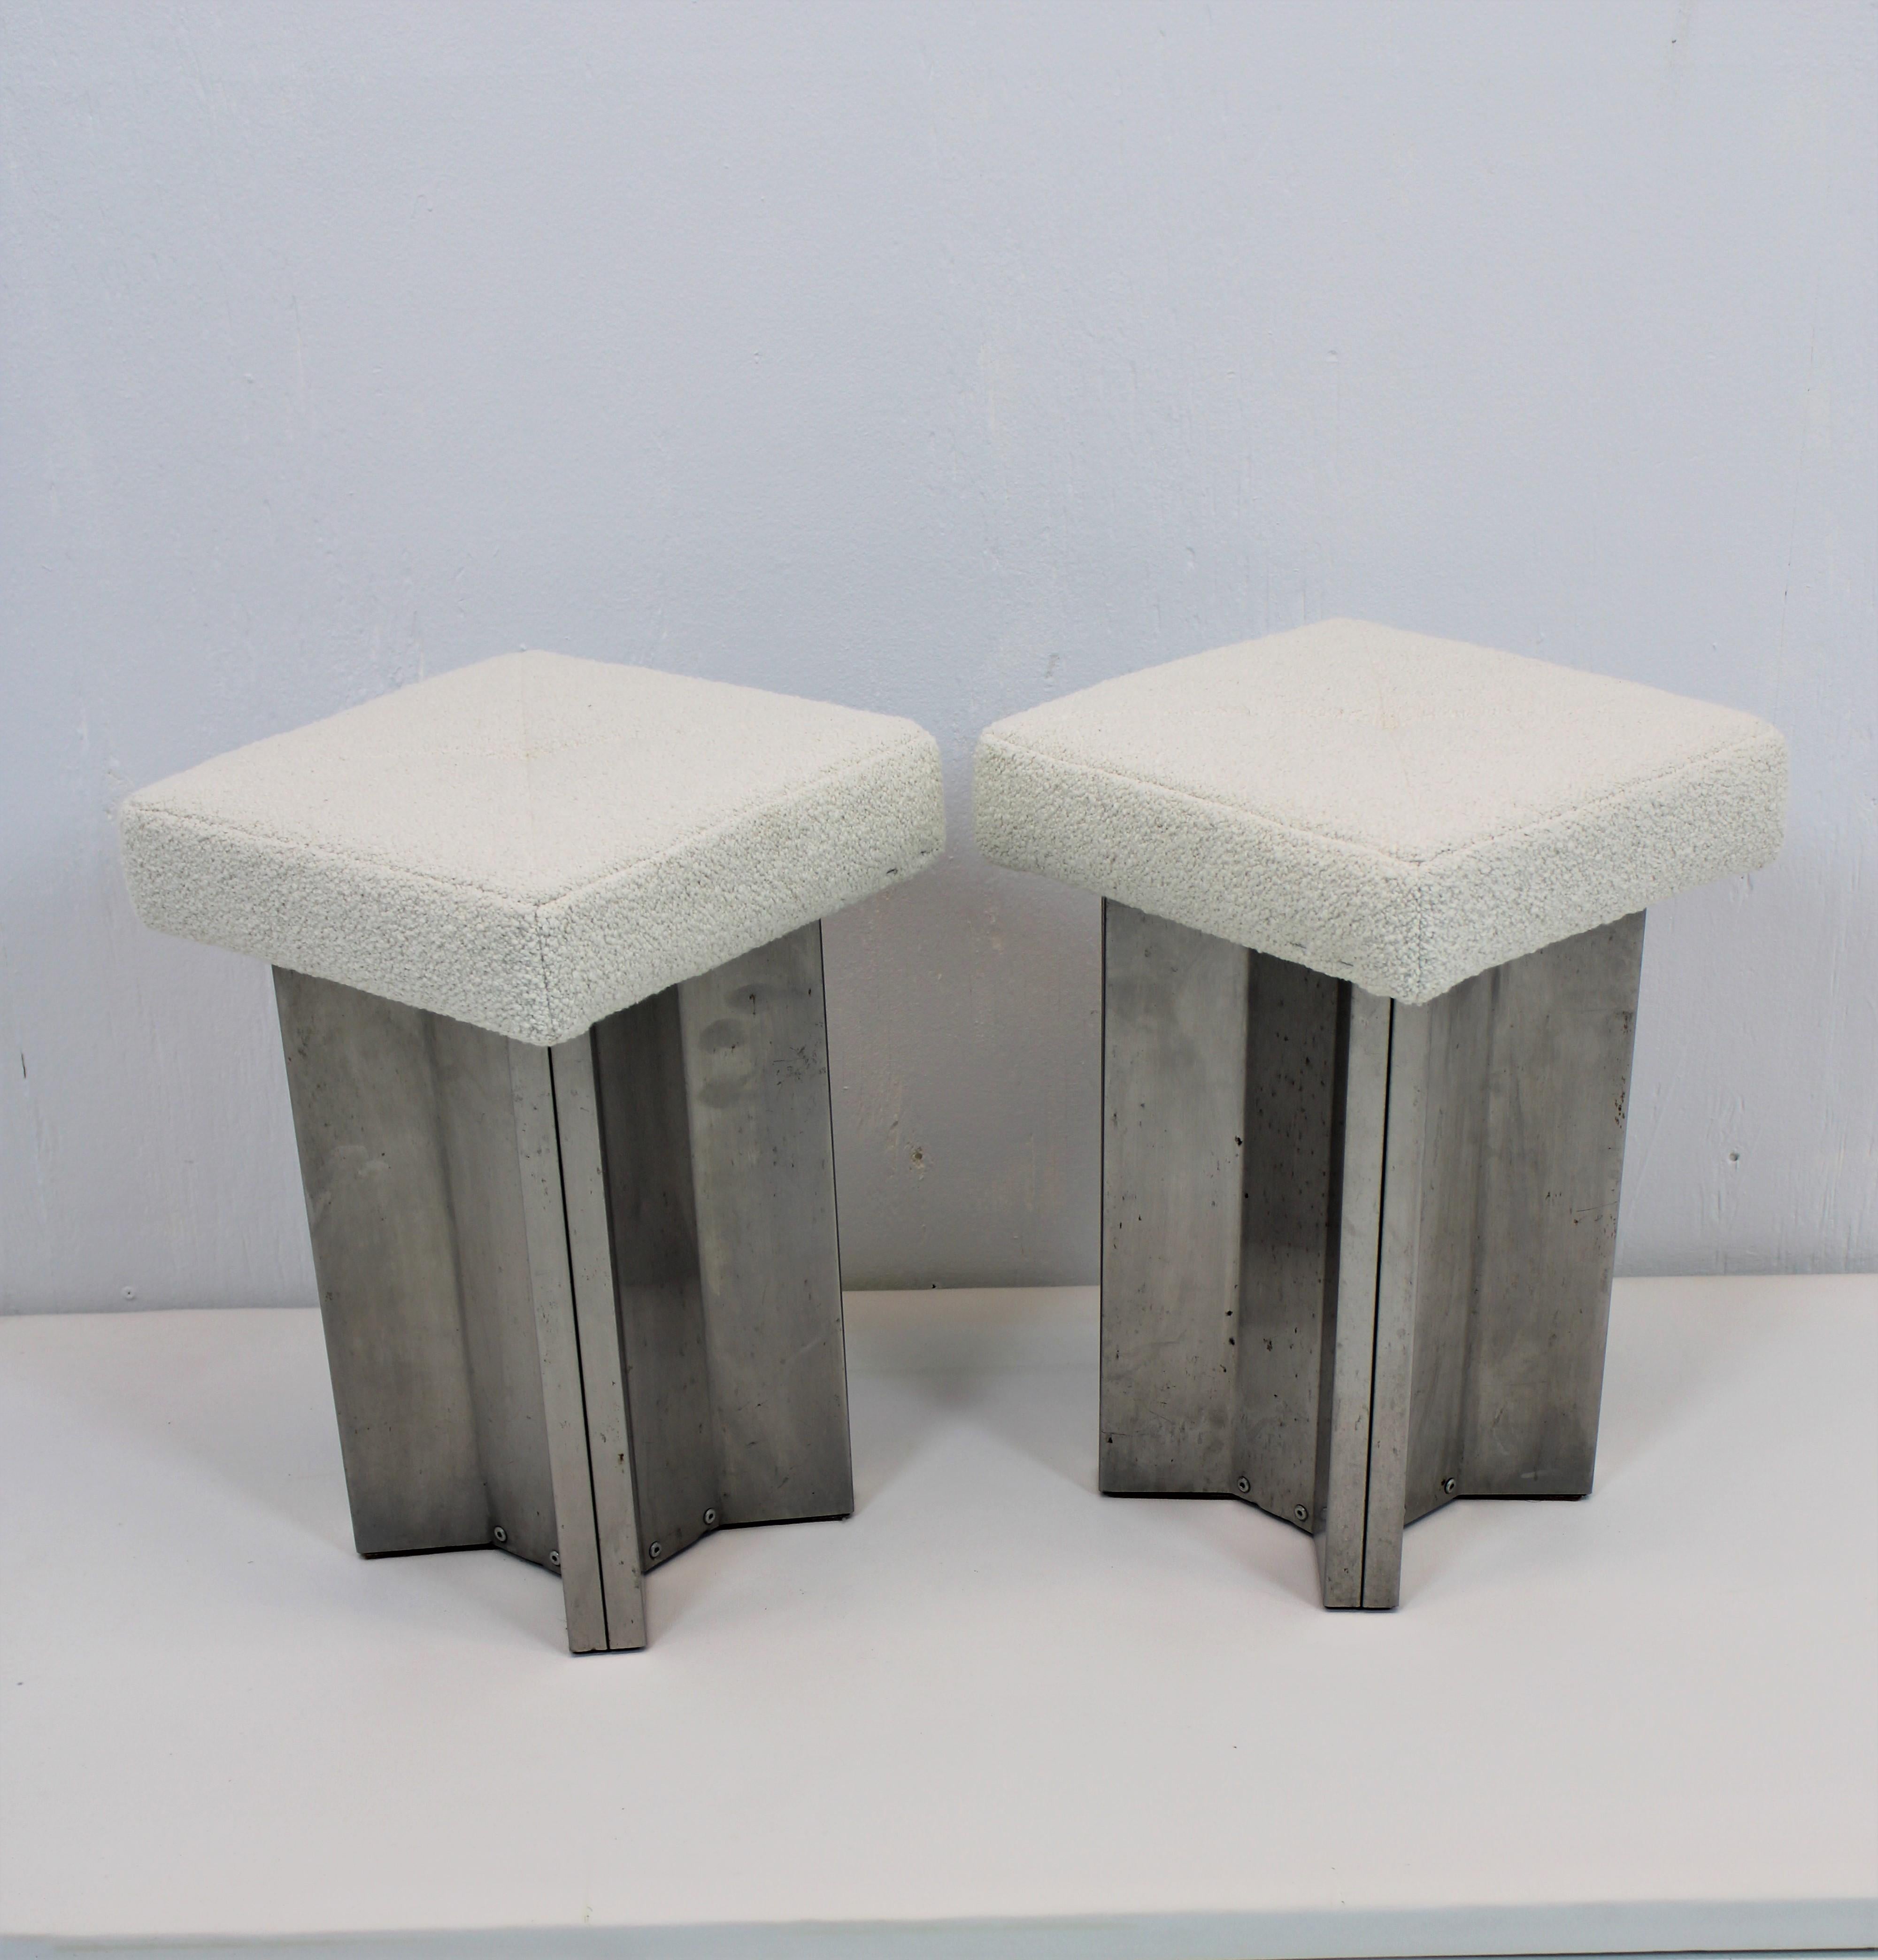 French Pair of Maison Jansen Stainless Steel Stools, France, 1970s